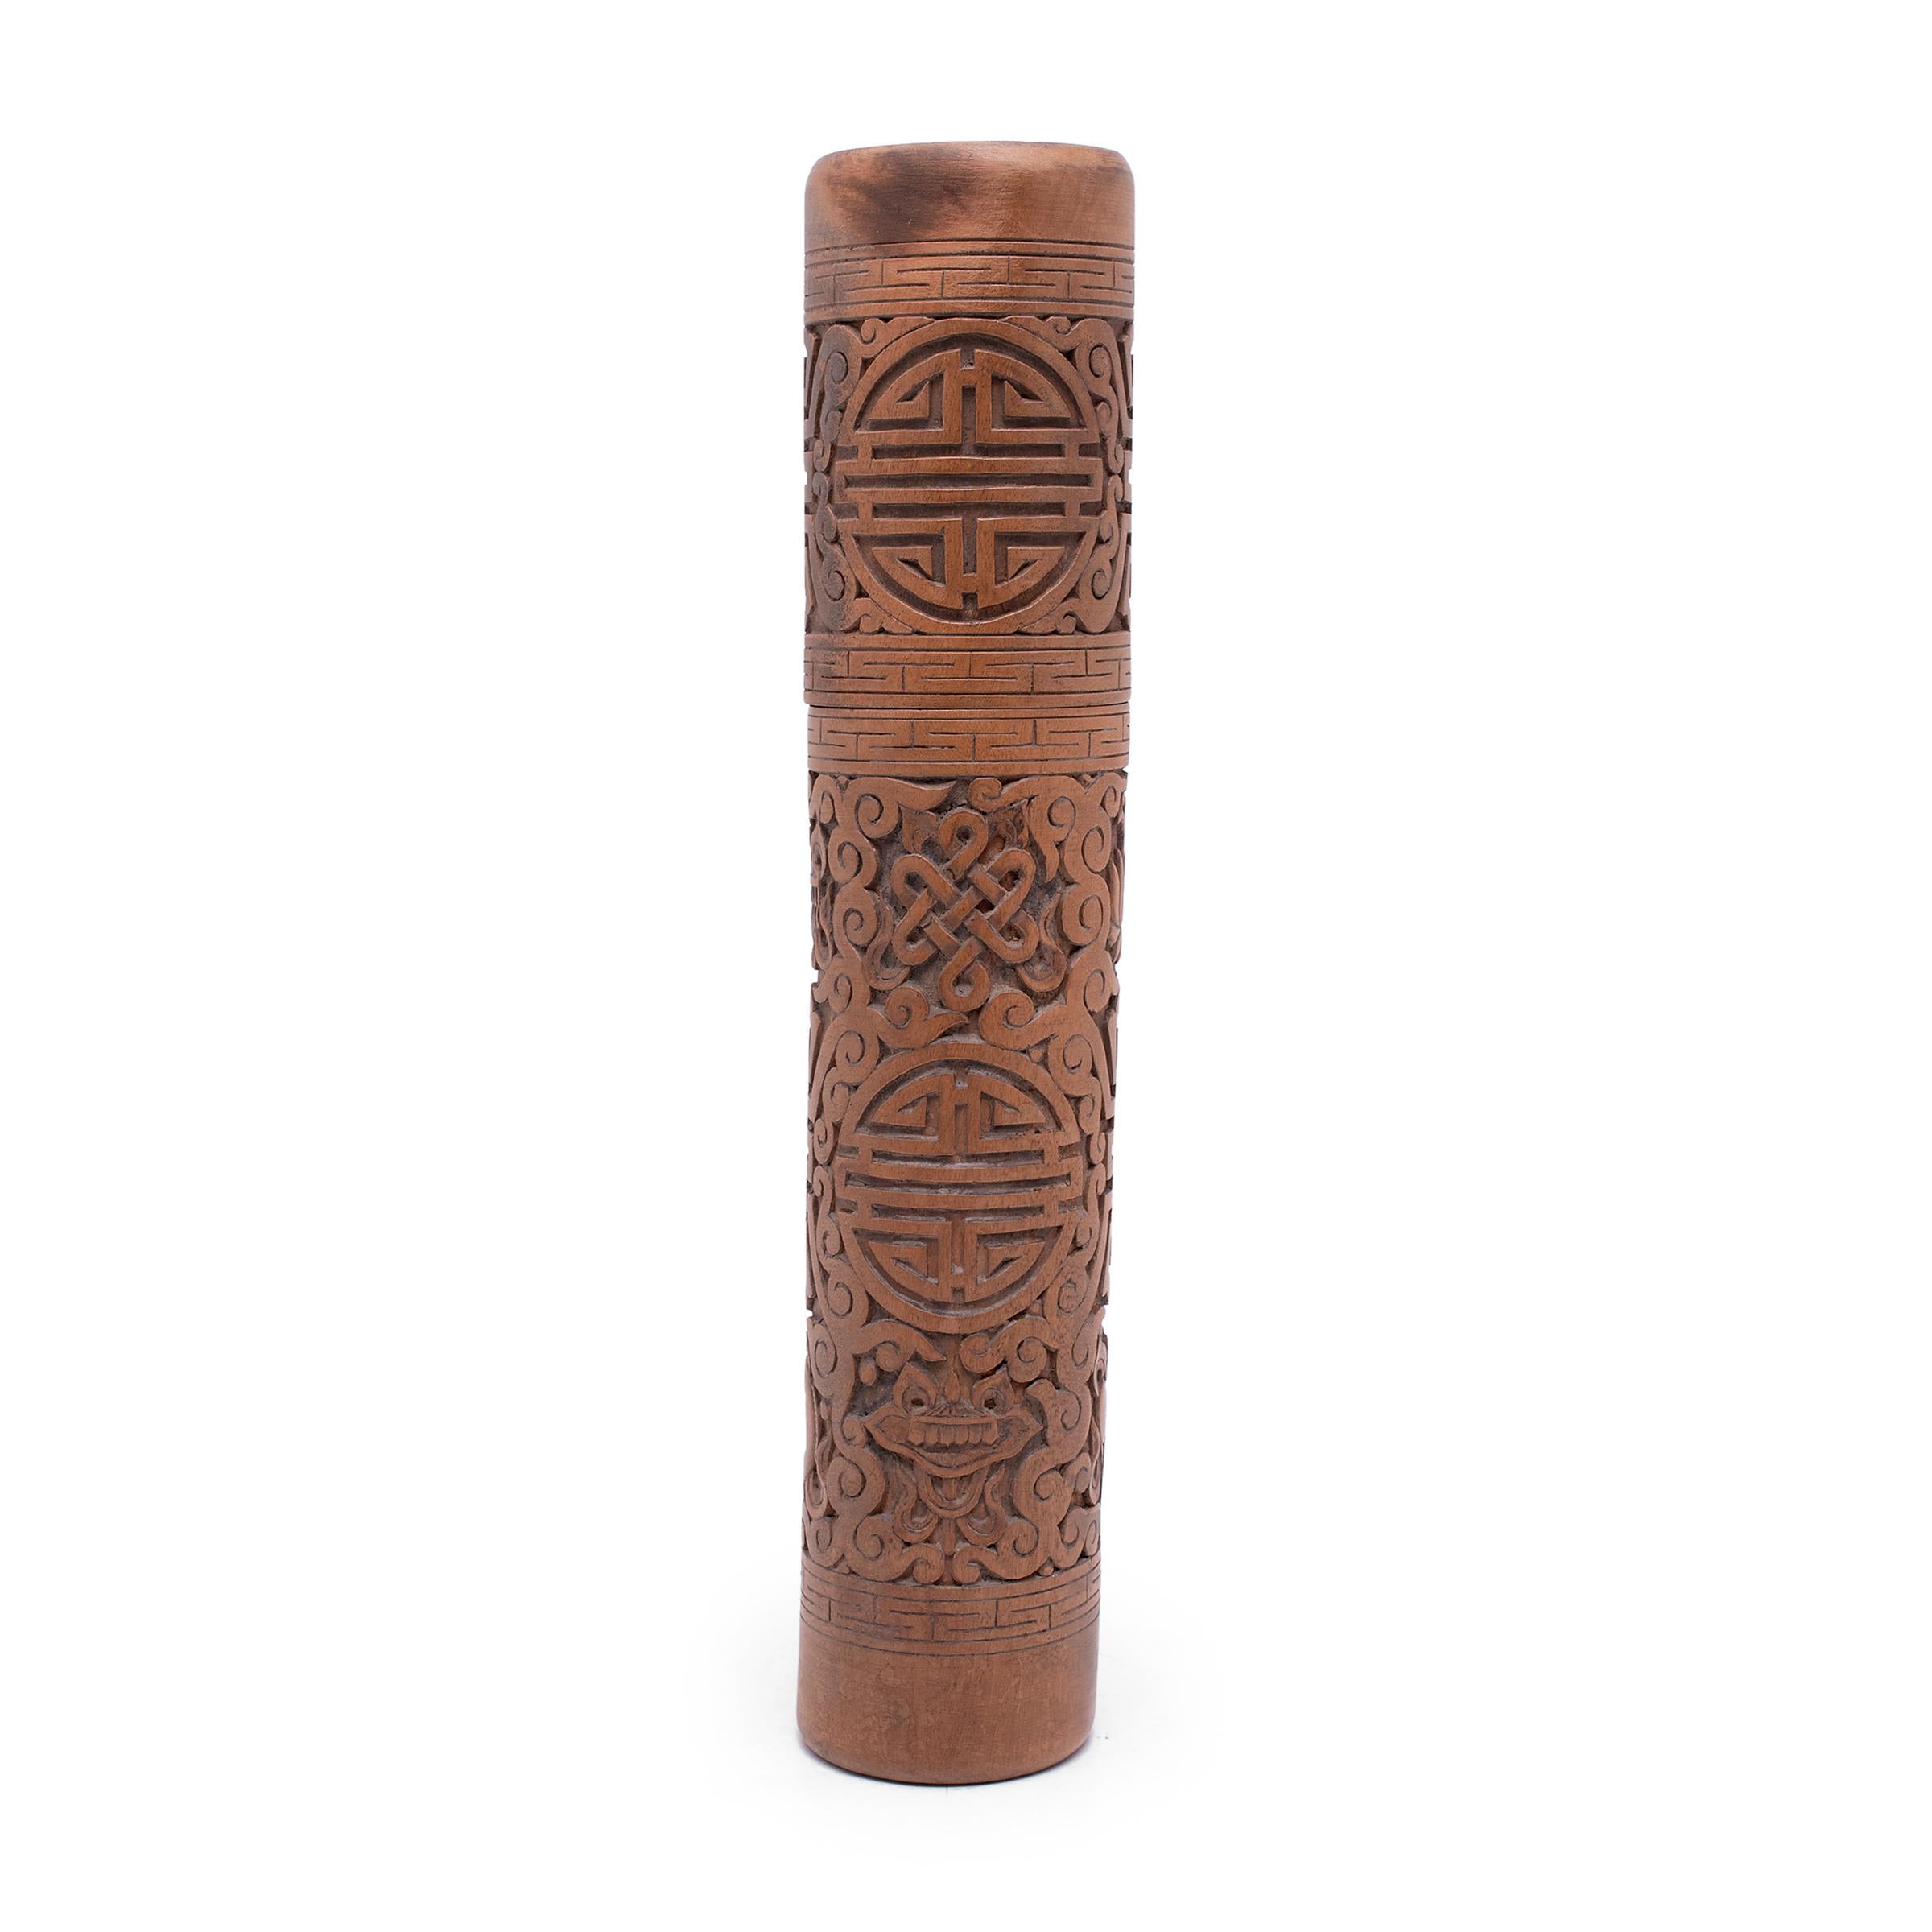 Delicately carved of dense hardwood, these 19th-century scroll cases were an essential accessory for the esteemed Qing-dynasty scholar. The perfect size for a rolled-up scroll, the cases were once used to store and protect works of traditional